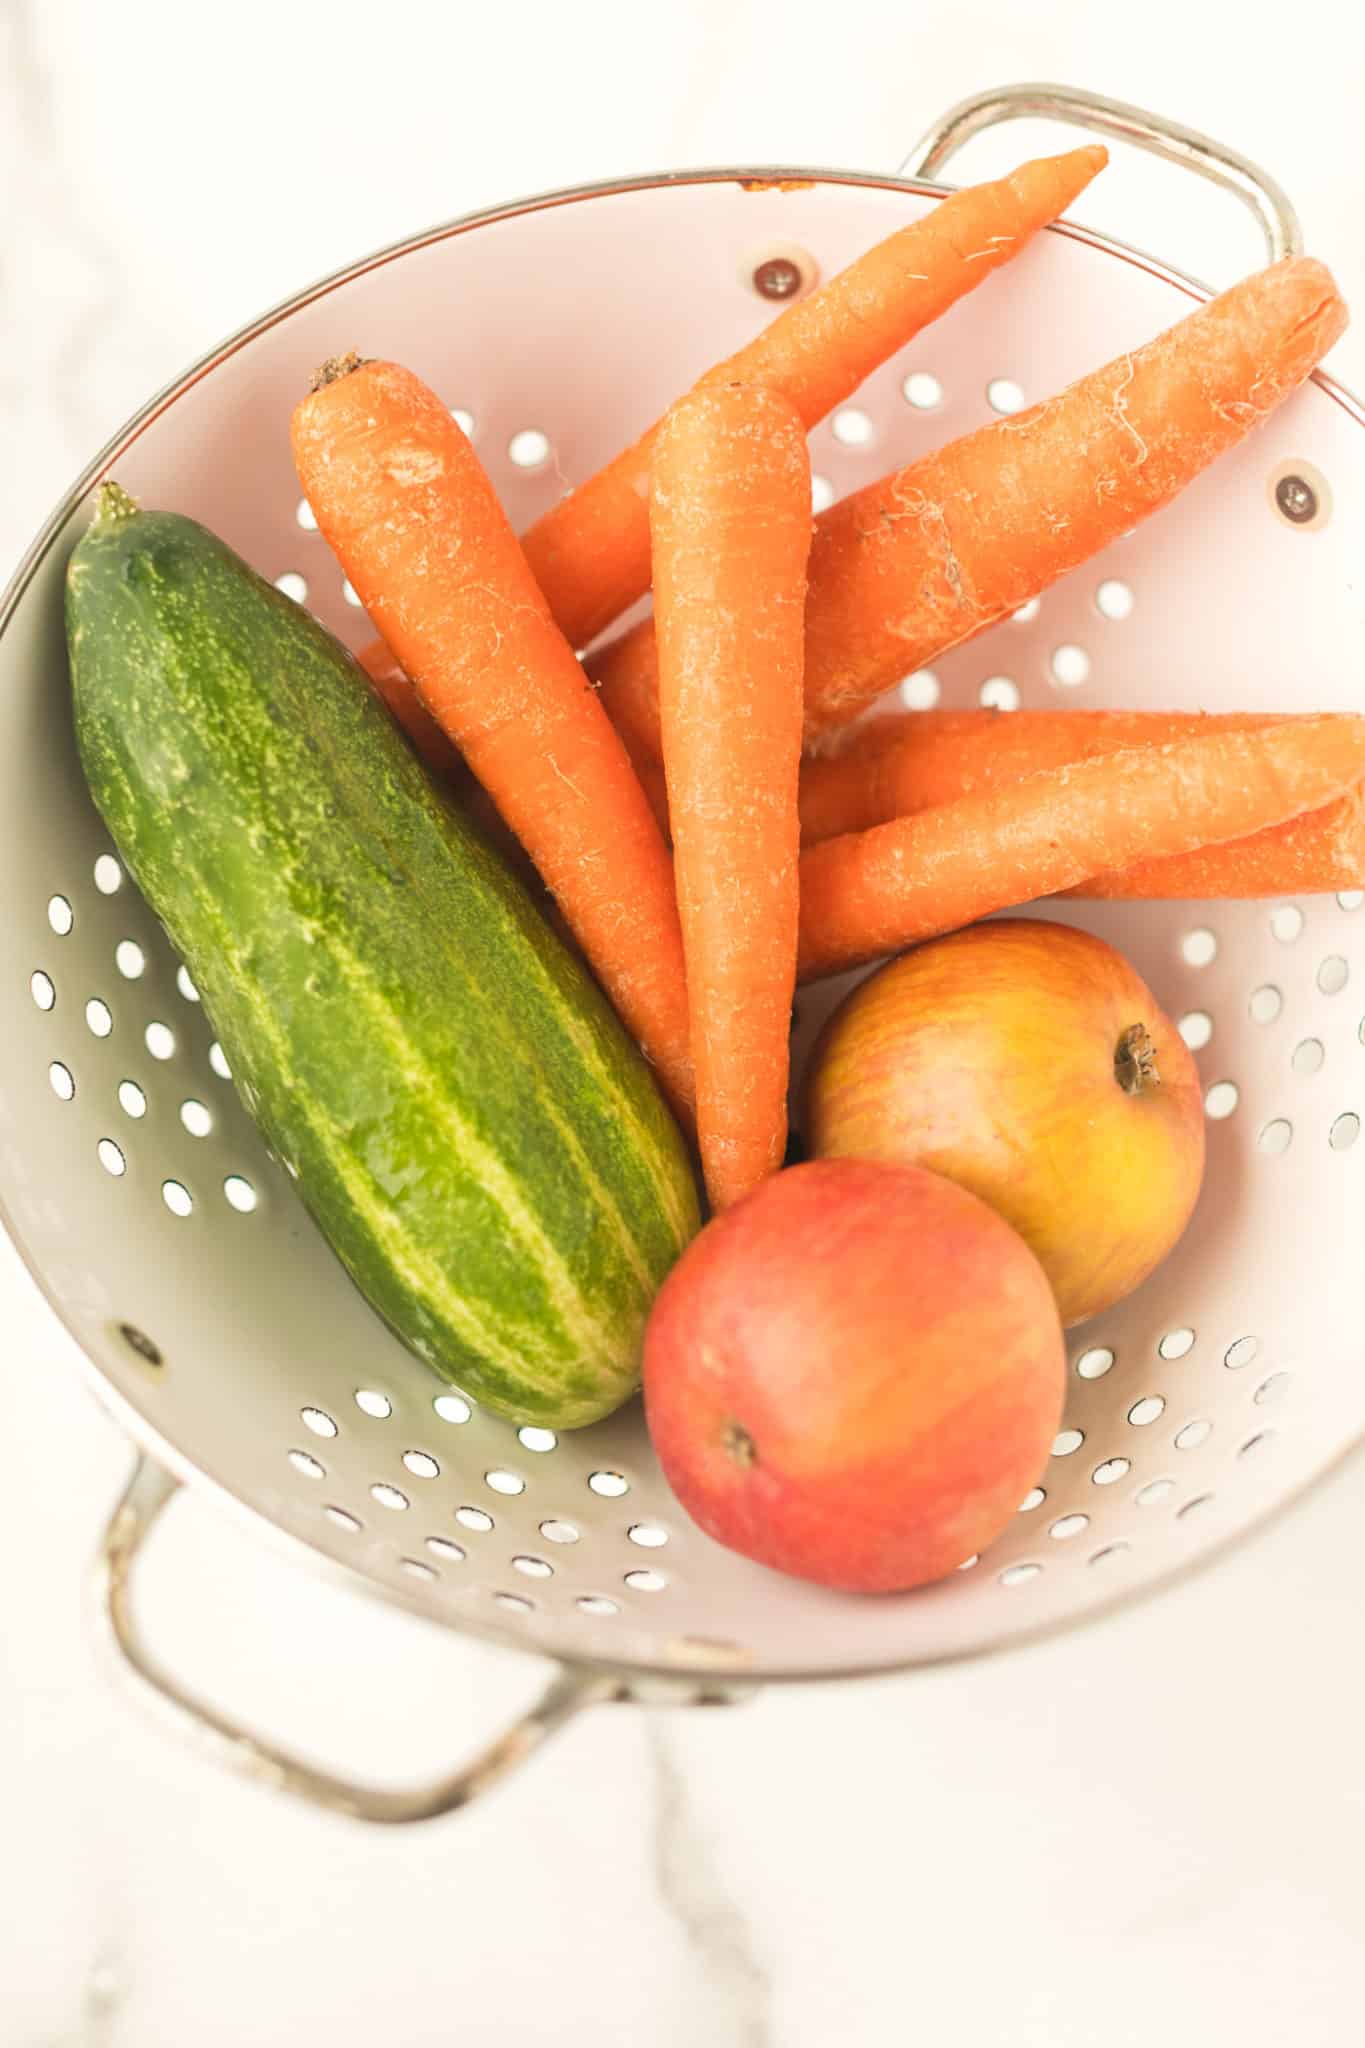 carrots, cucumber, and apple in a colander ready to be juiced.